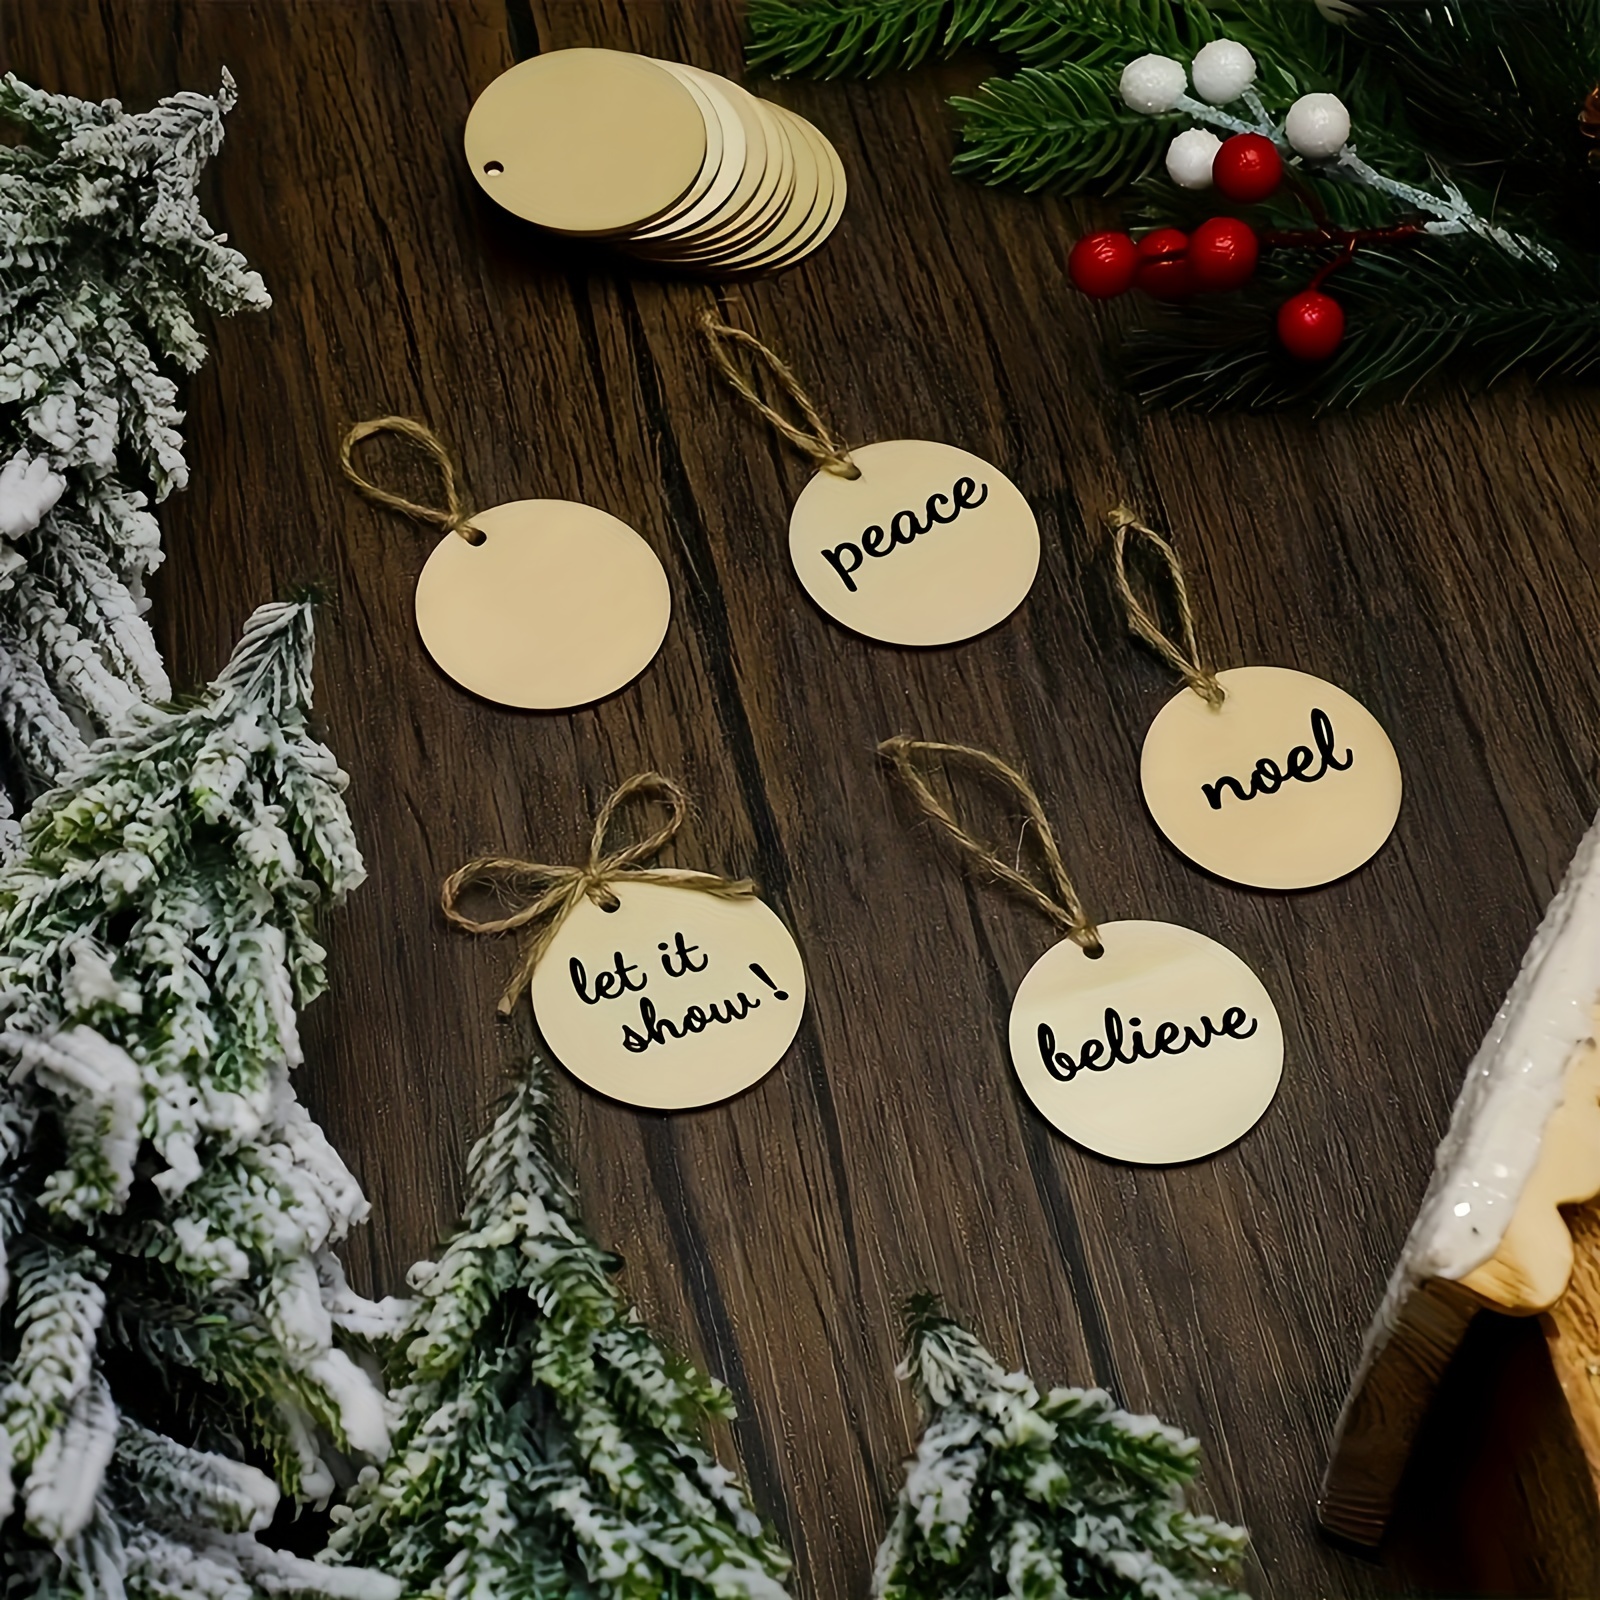 6 DIY Christmas decorations with wooden discs 